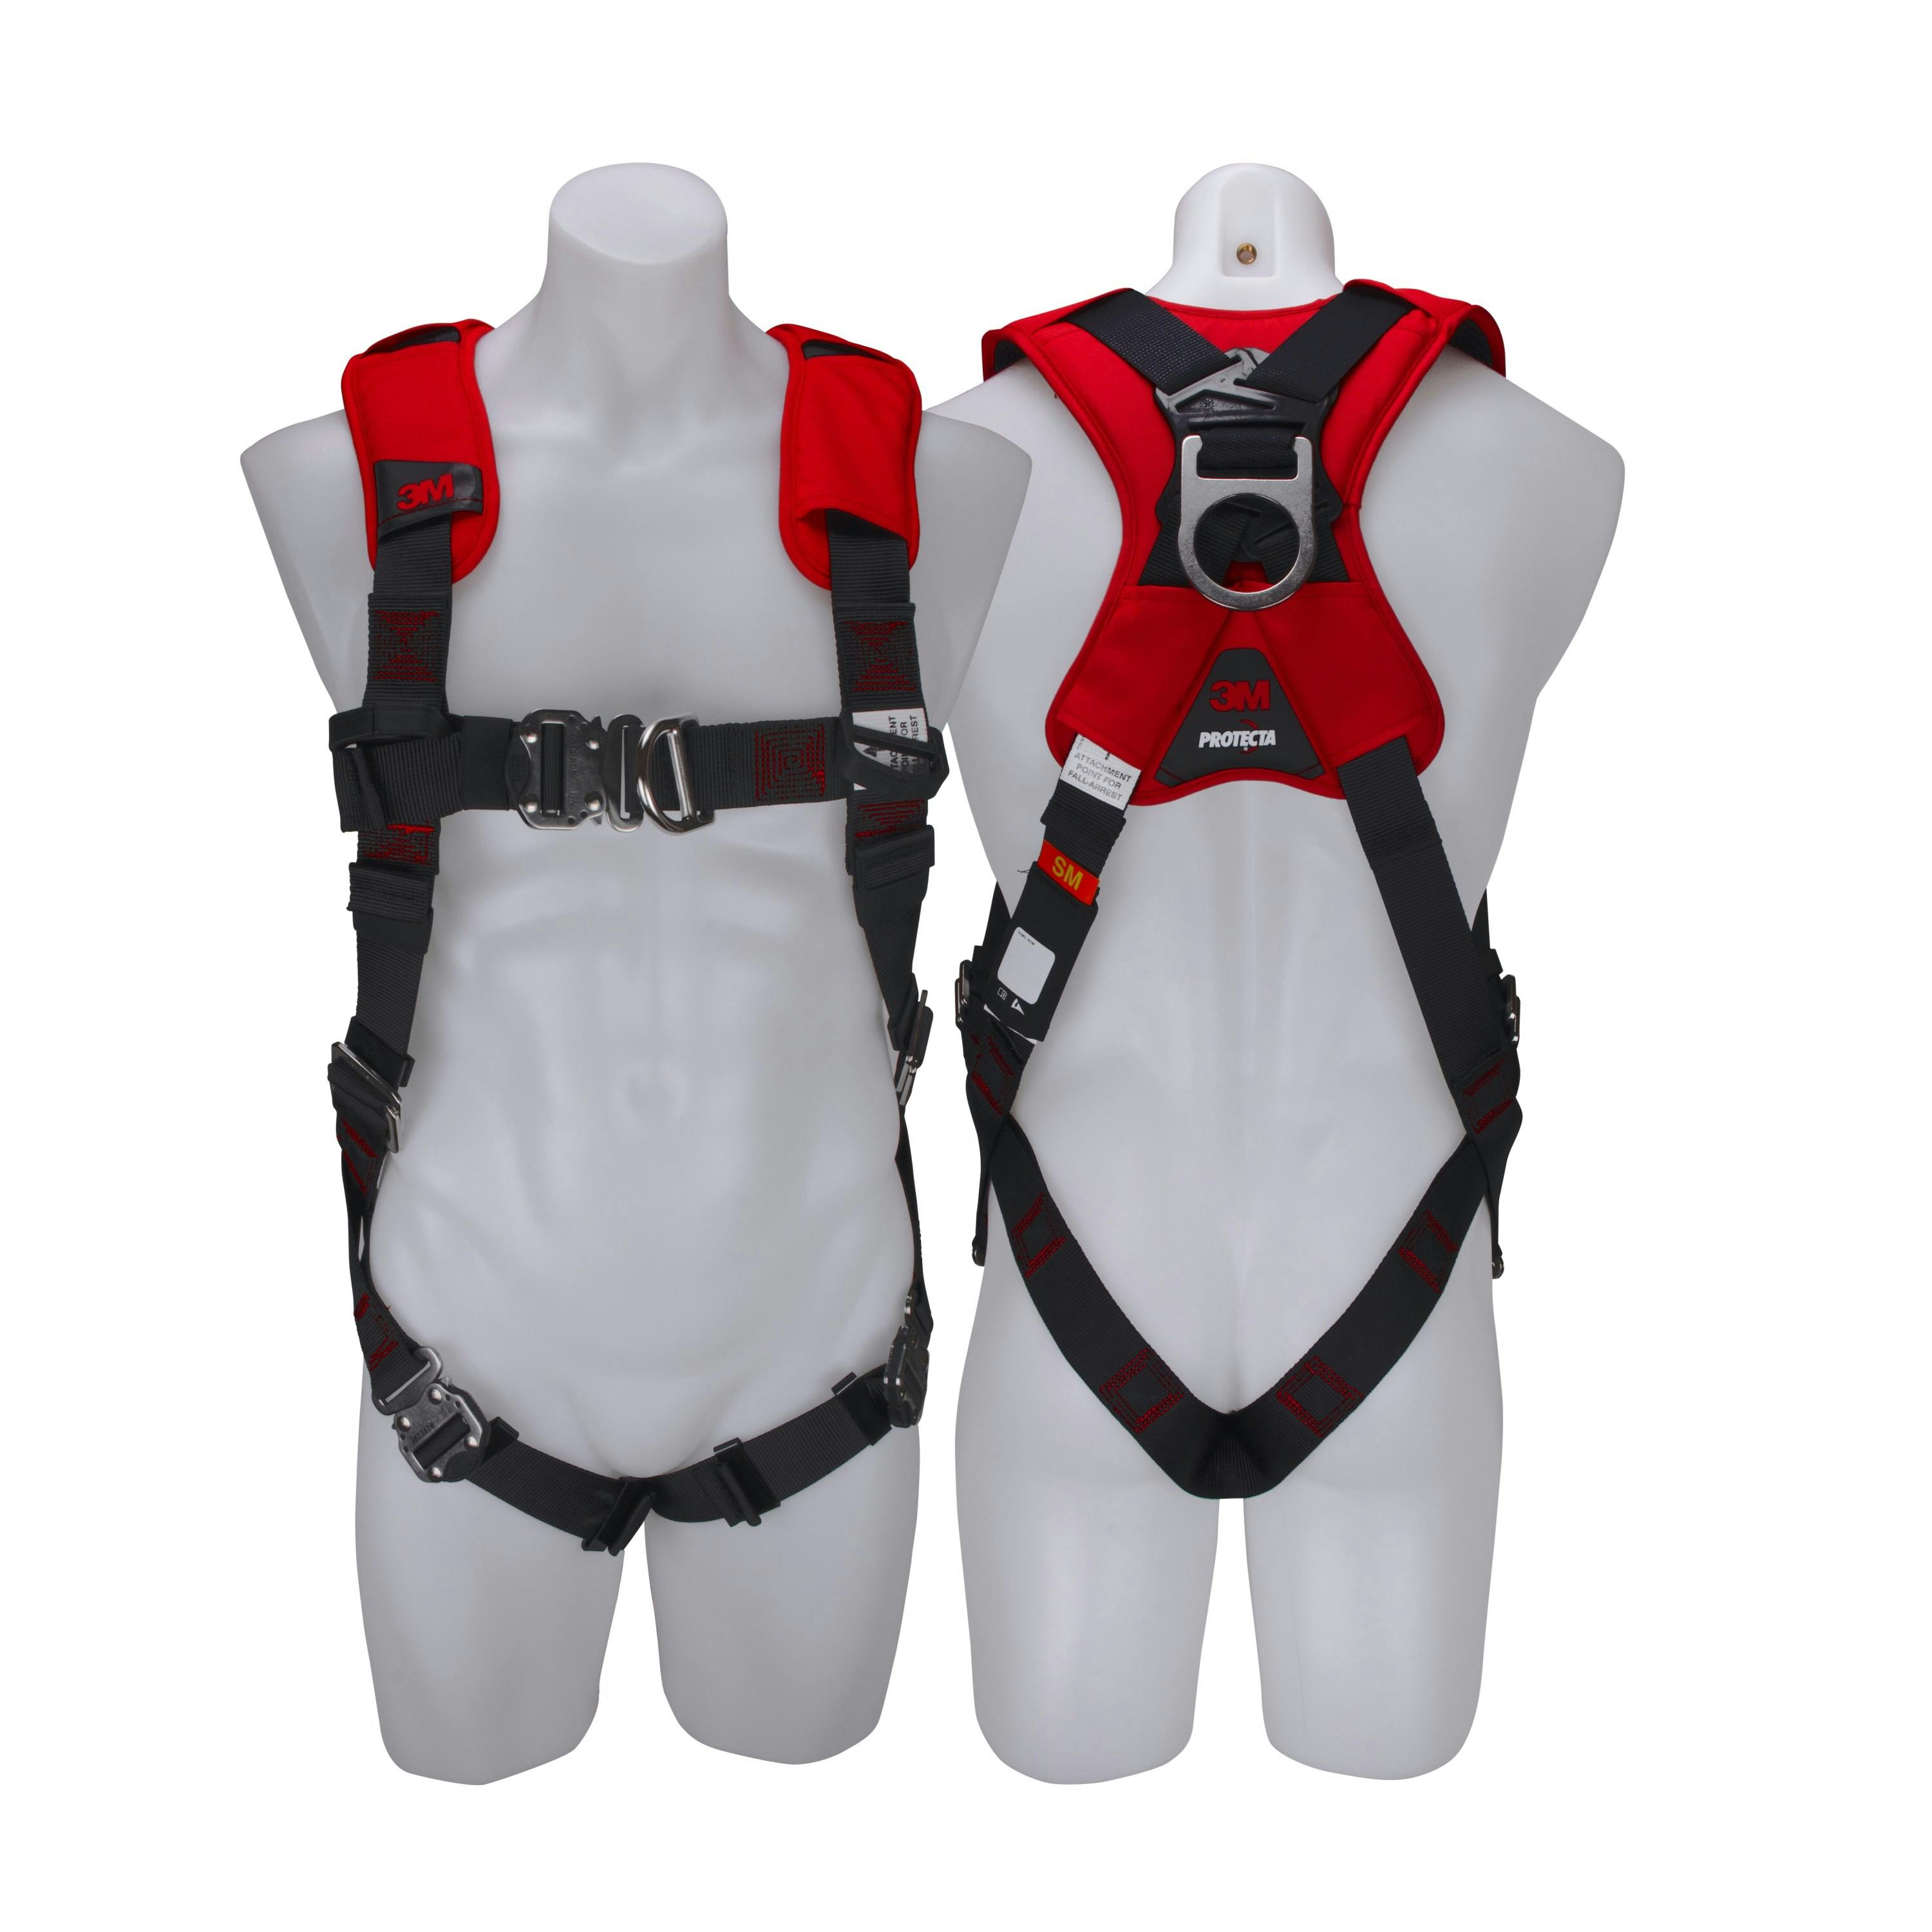 3M™ PROTECTA® X Riggers Harness with Stainless Steel and Padding 1161668, Red and Black, Small, 1 EA/Case